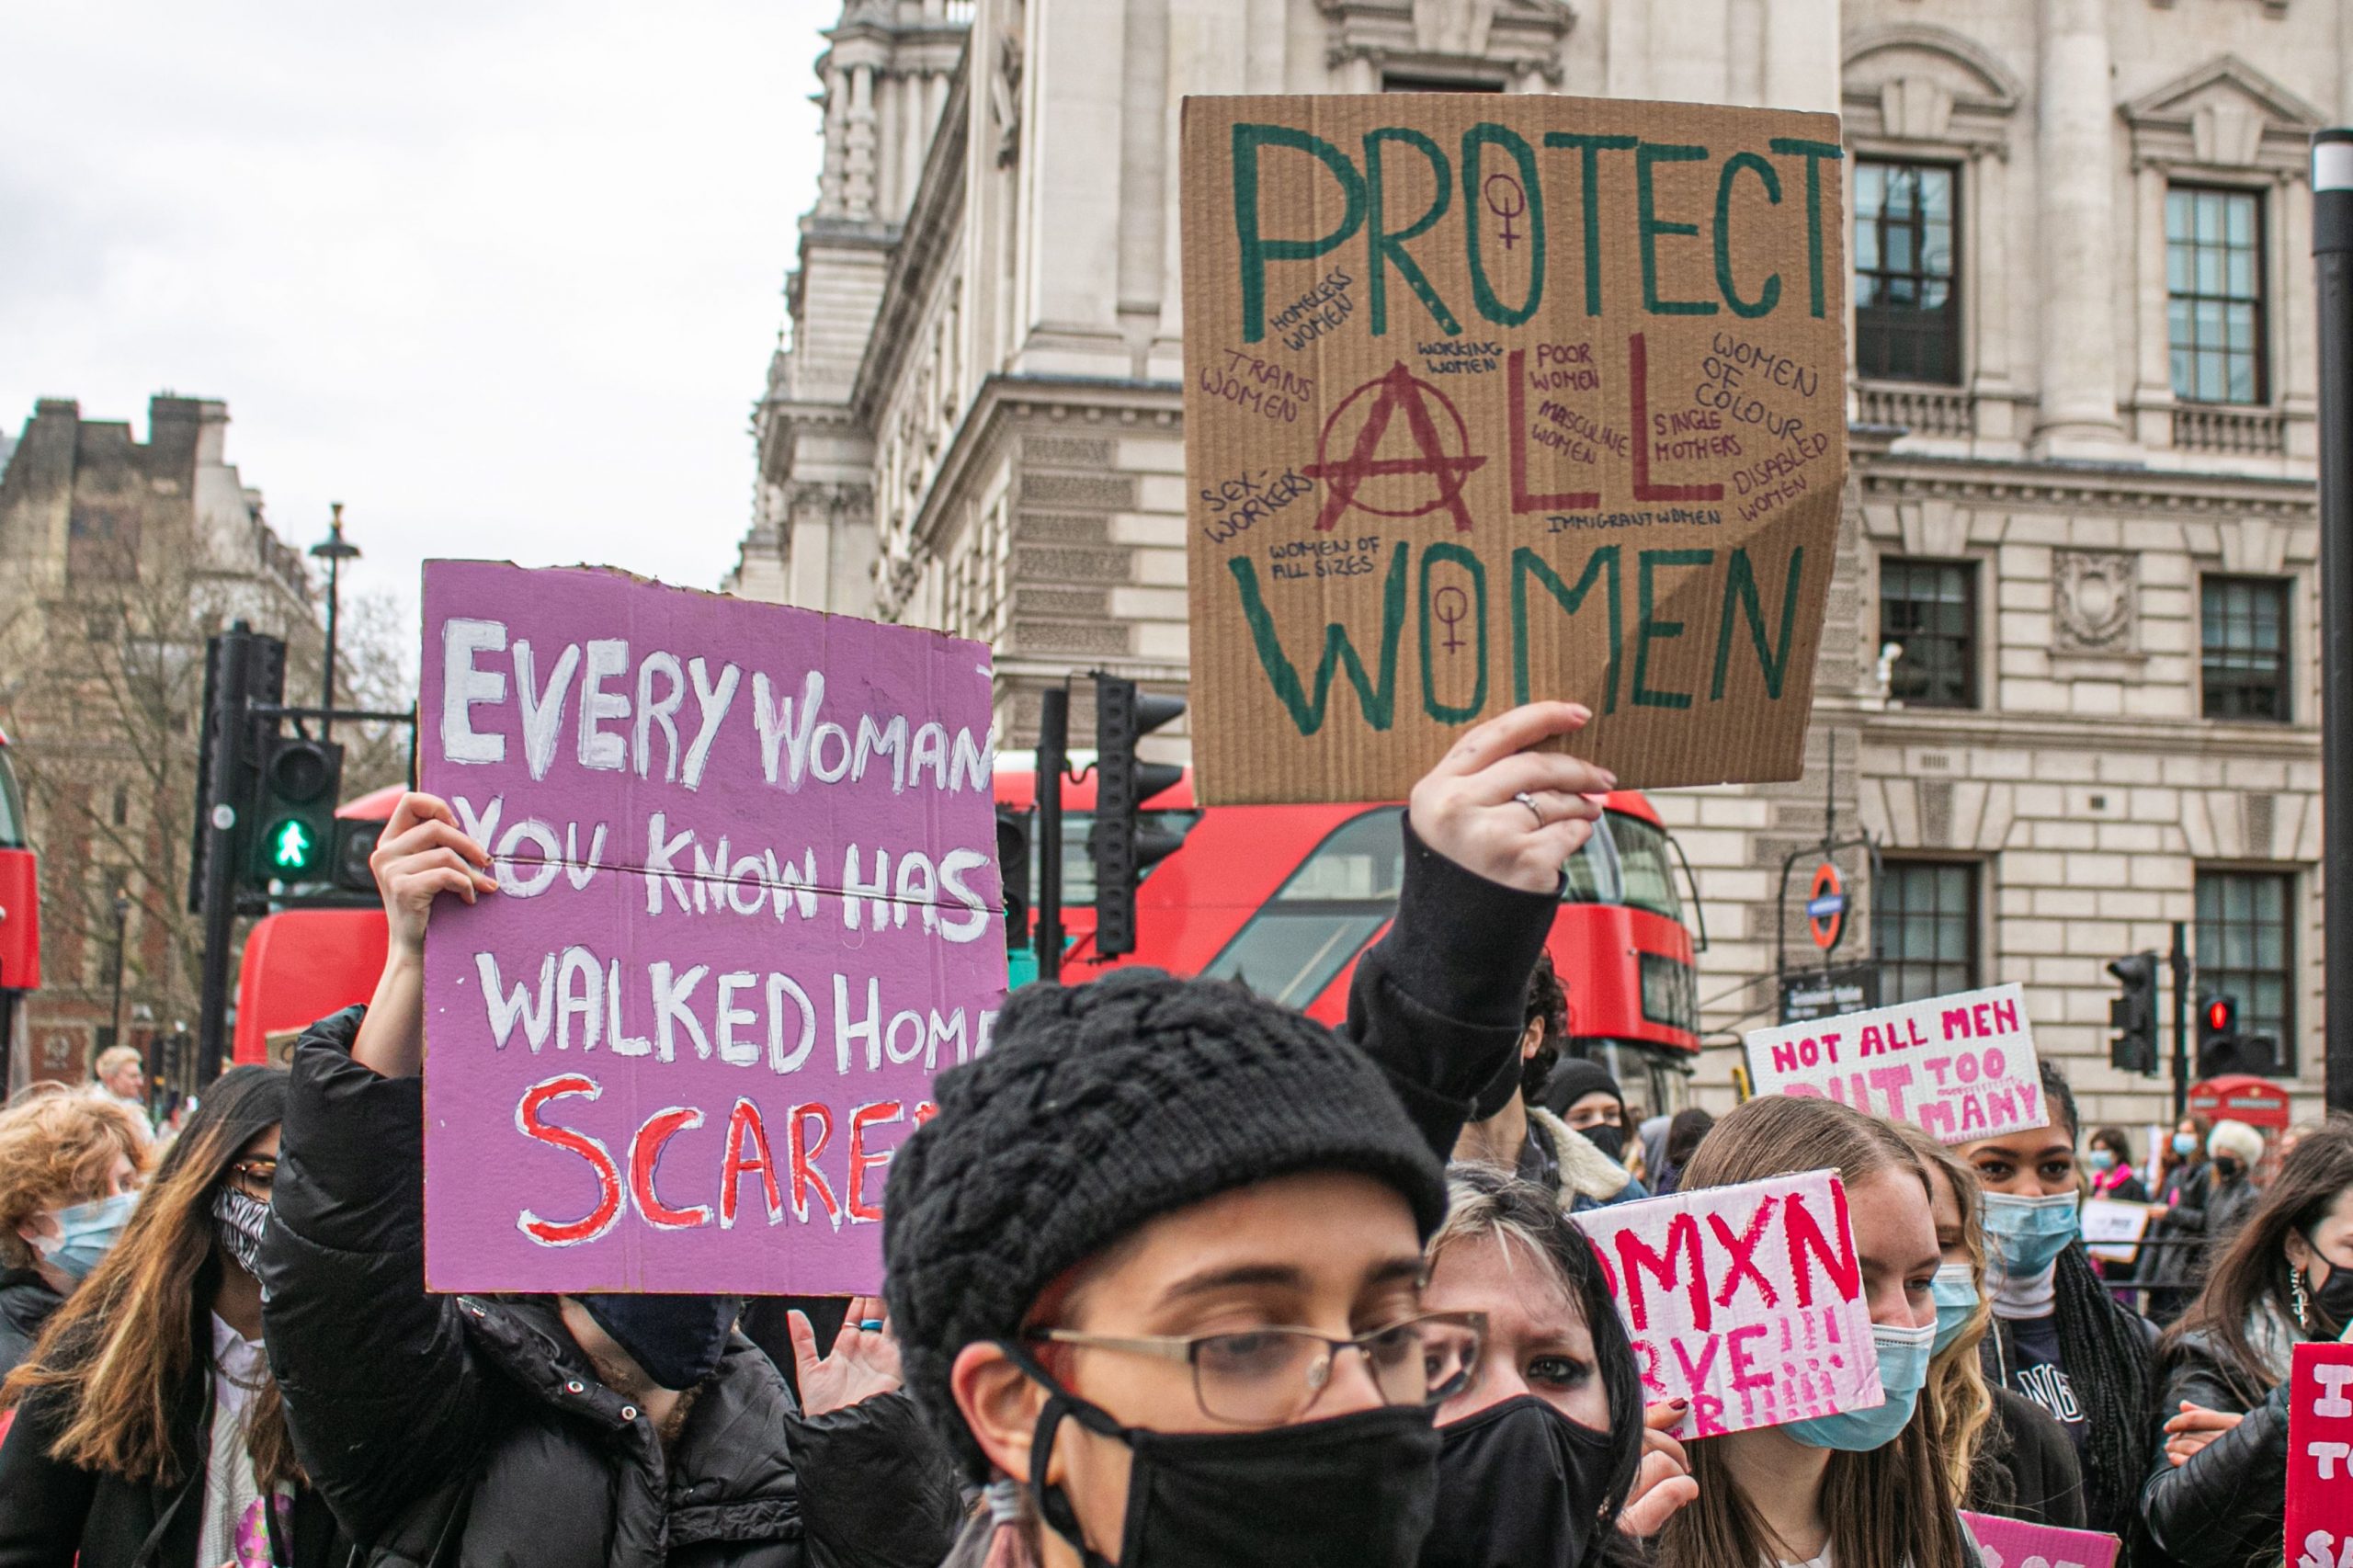 Protest signs reading "Every woman you know has walked home scared" and "Protect all women"